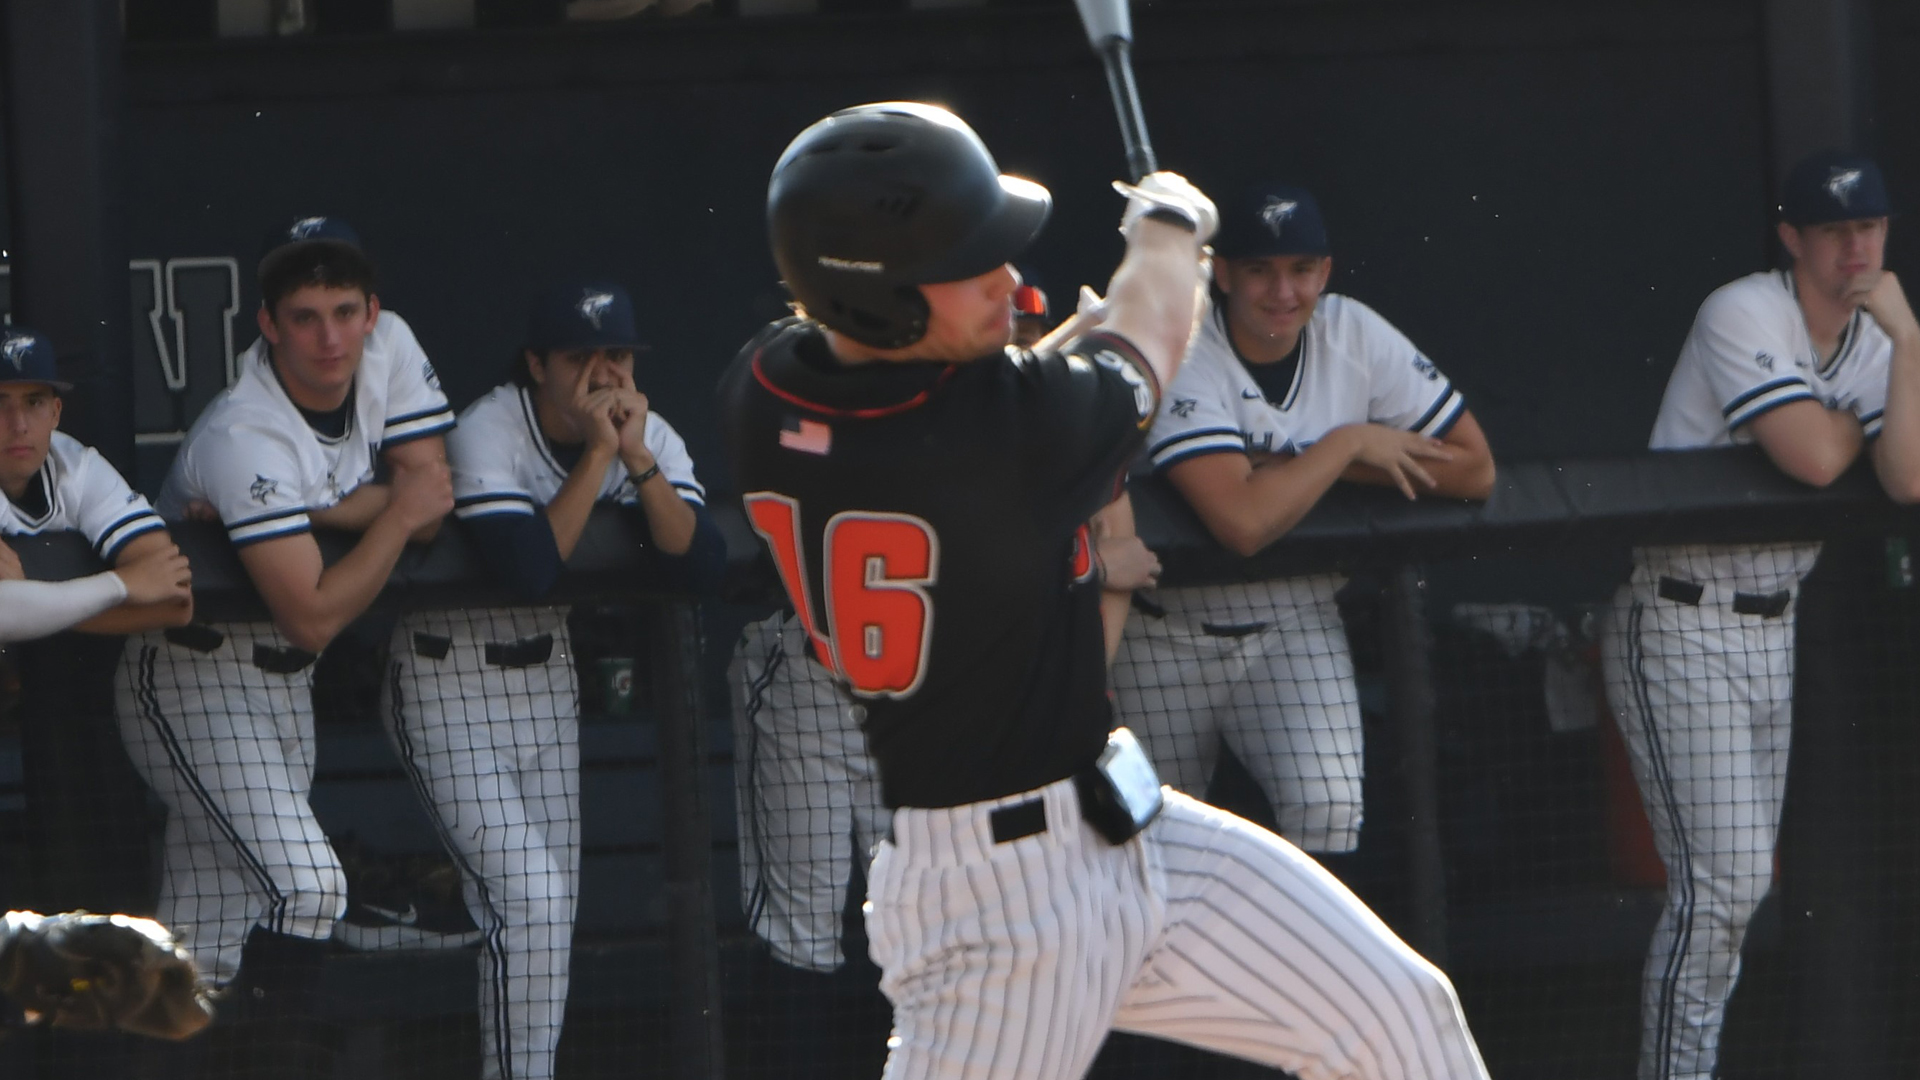 Jake Absher's first collegiate home run was a grand slam vs No. 13 Young Harris.